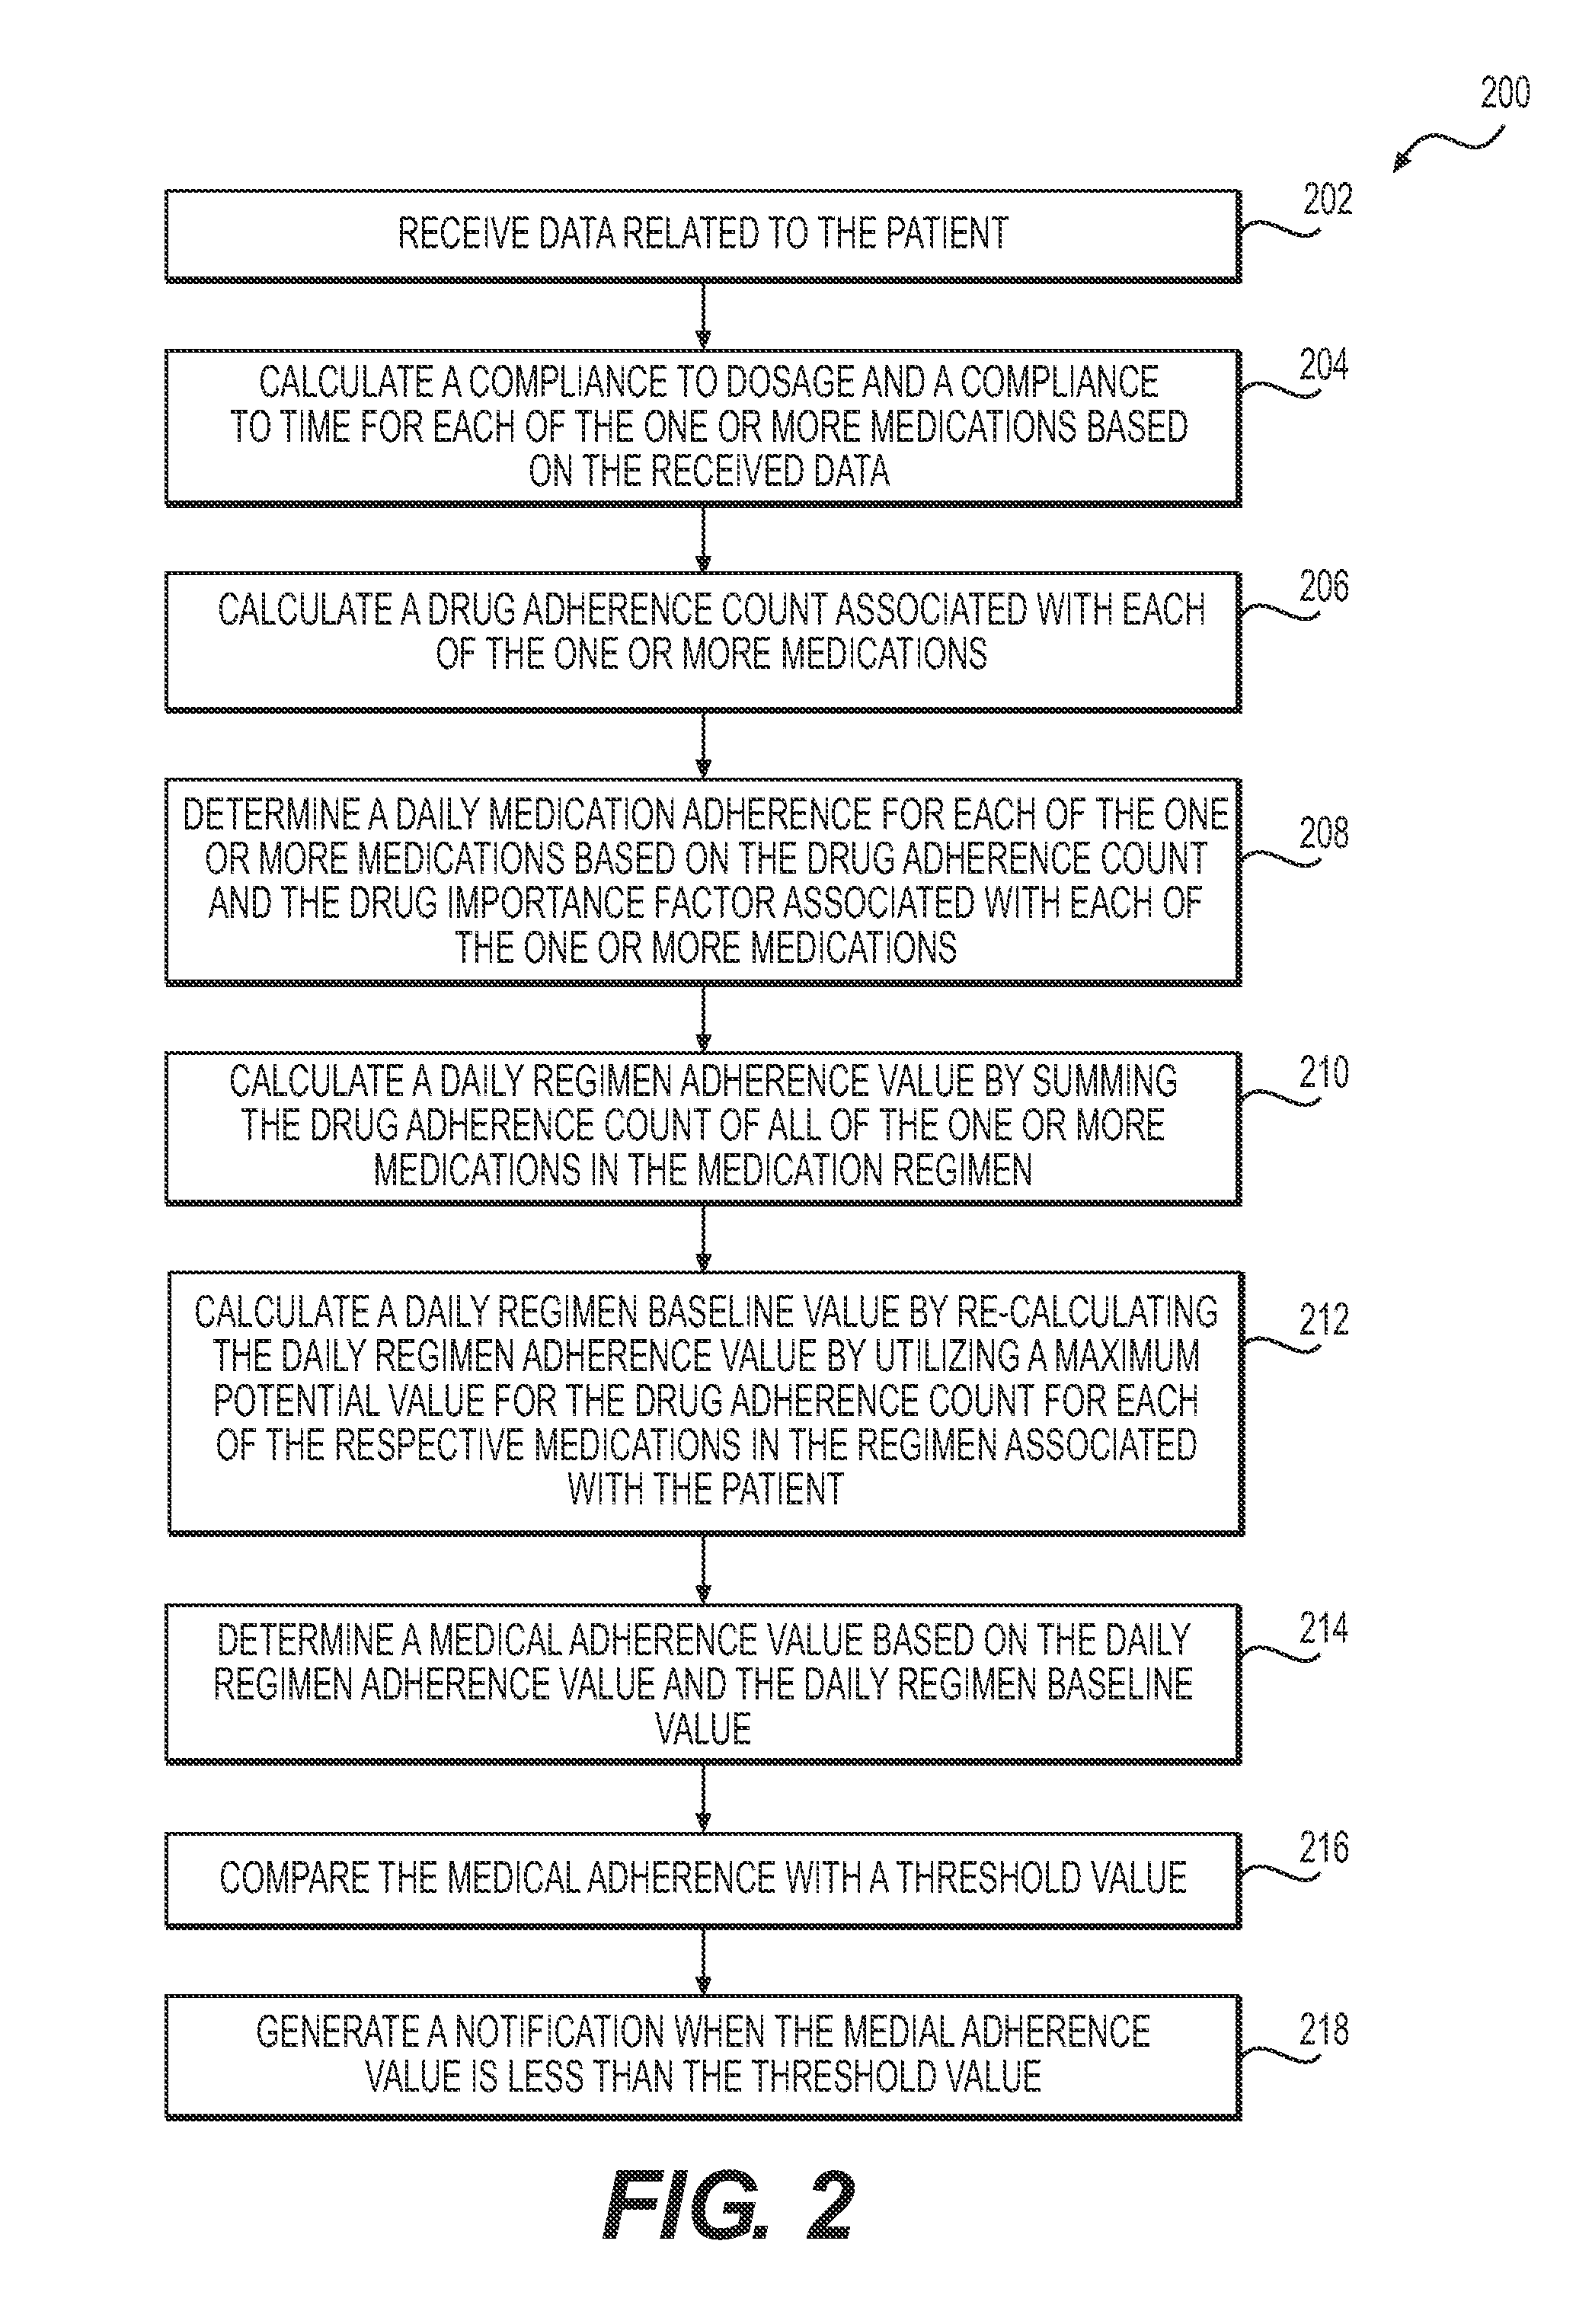 Systems and methods for managing medication adherence